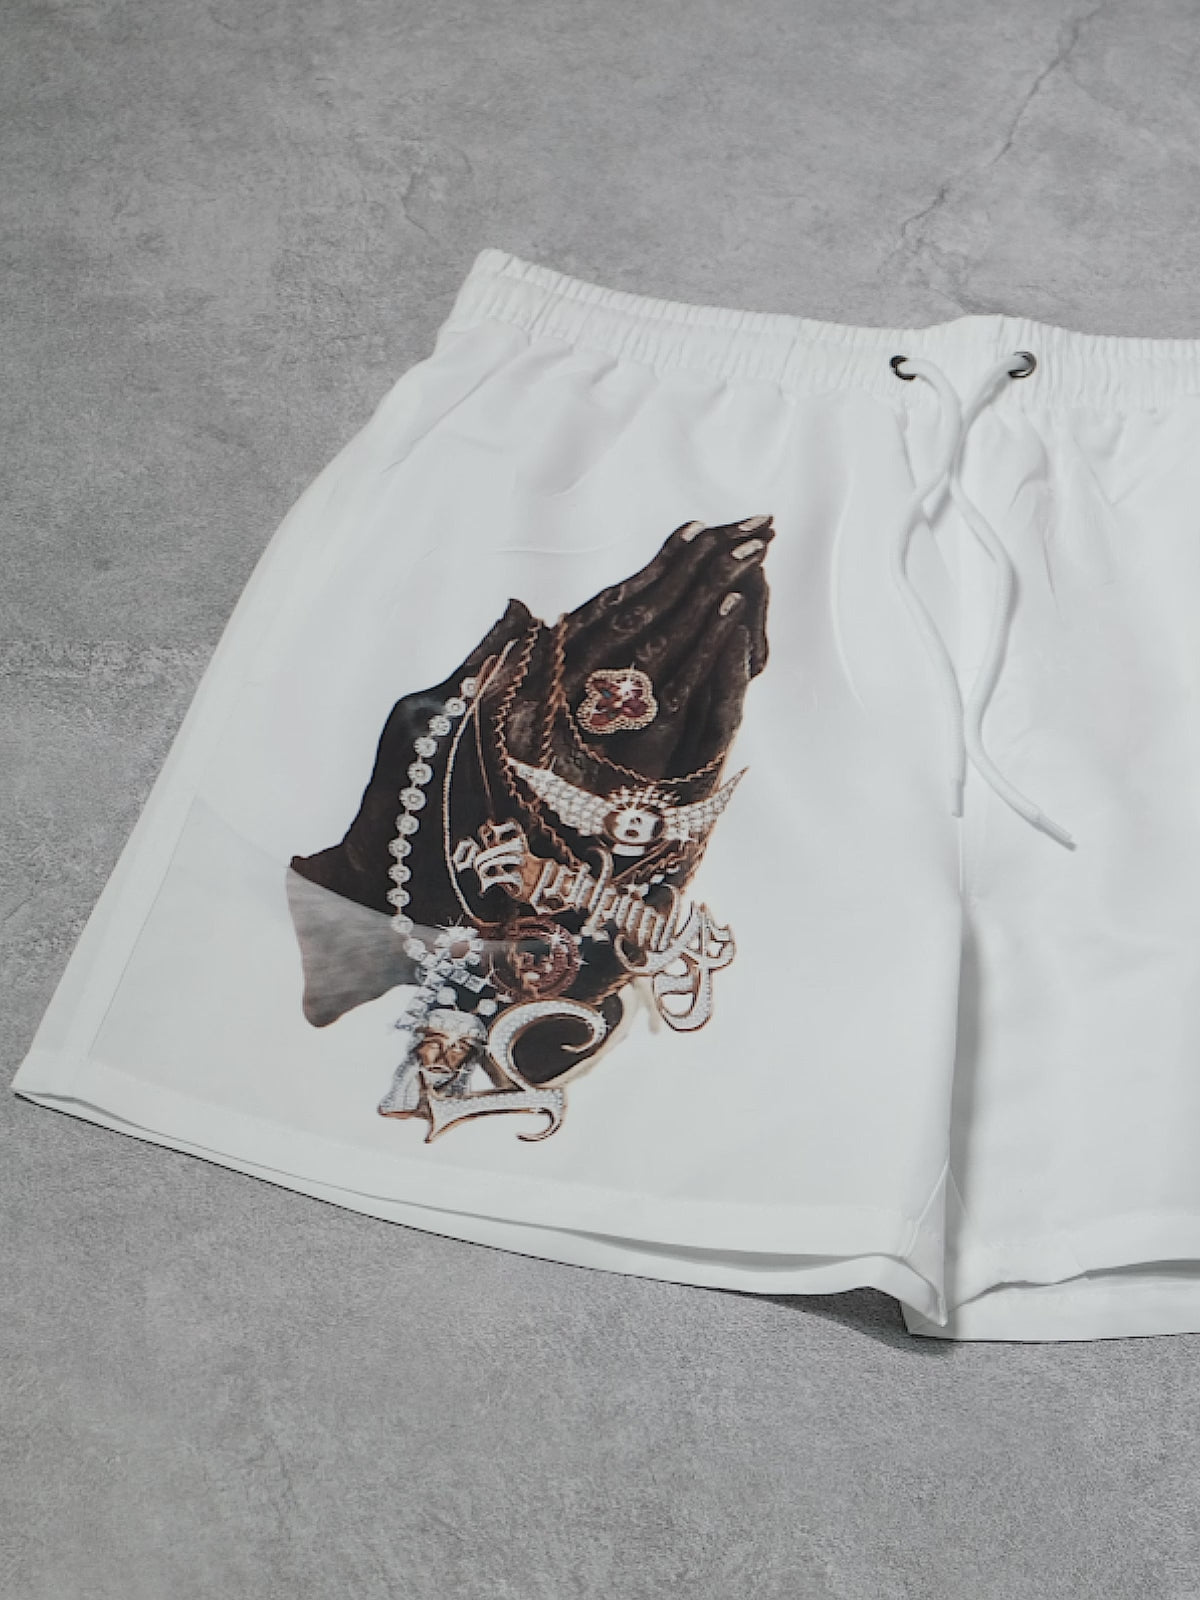 Rising Hand Two-Tone Printed Loose Beach Quick Dry Shorts